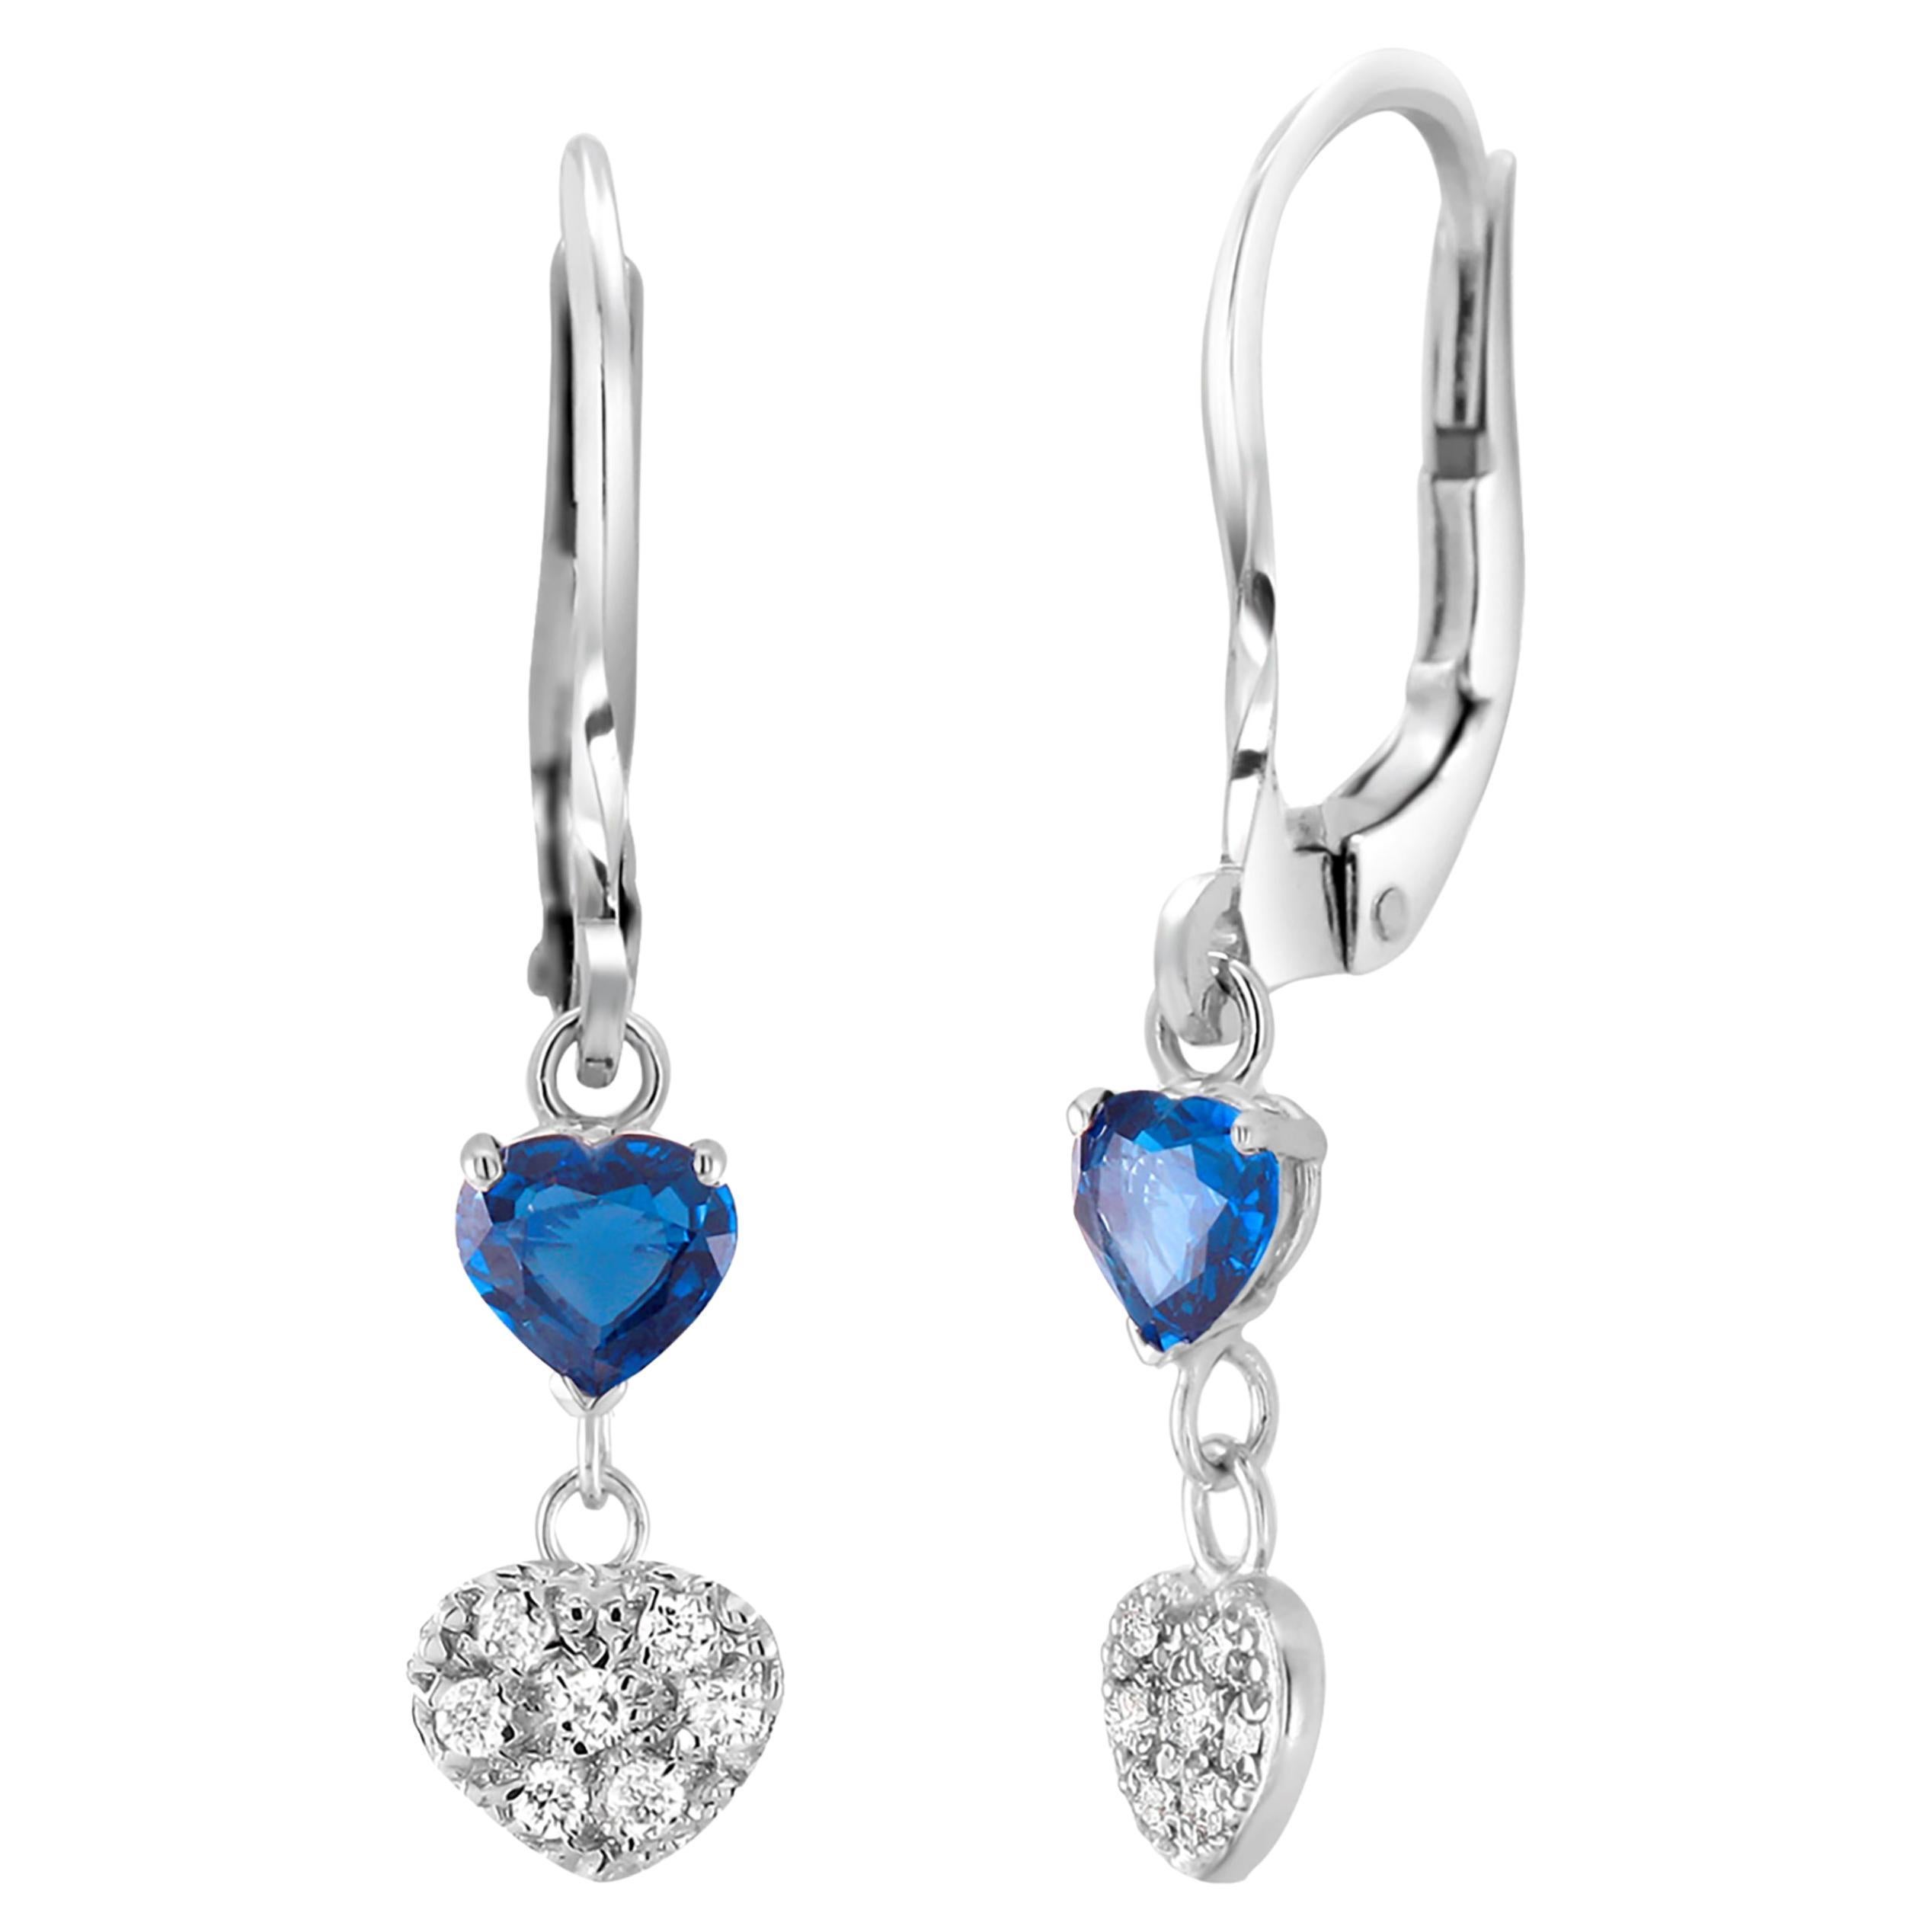 White Gold Earrings with Heart Shaped Pave Diamond Charm Heart Shaped ...